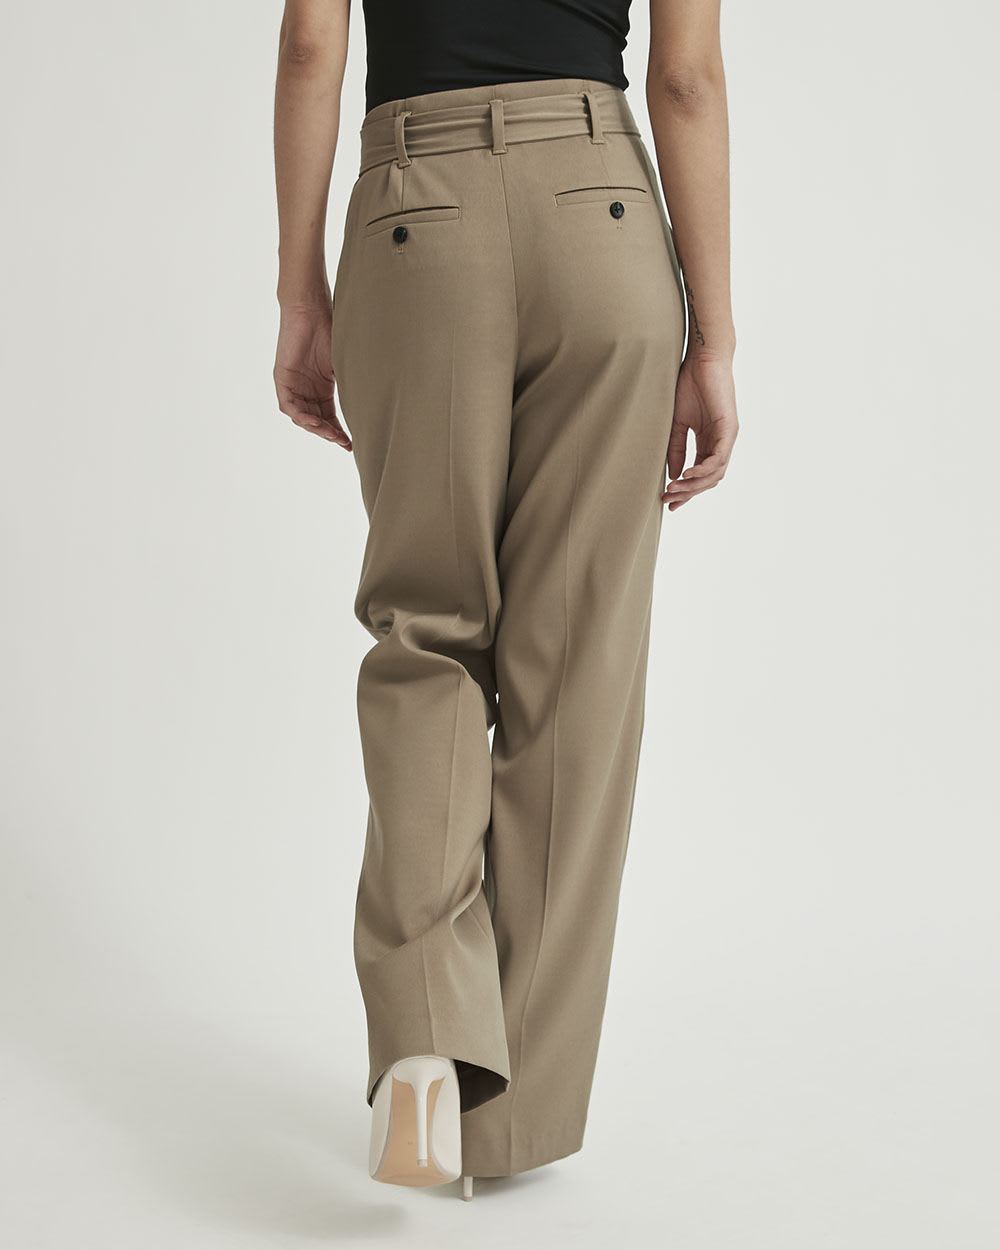 Twill High-Waist Wide Leg Pant with Removable Sash - 33"